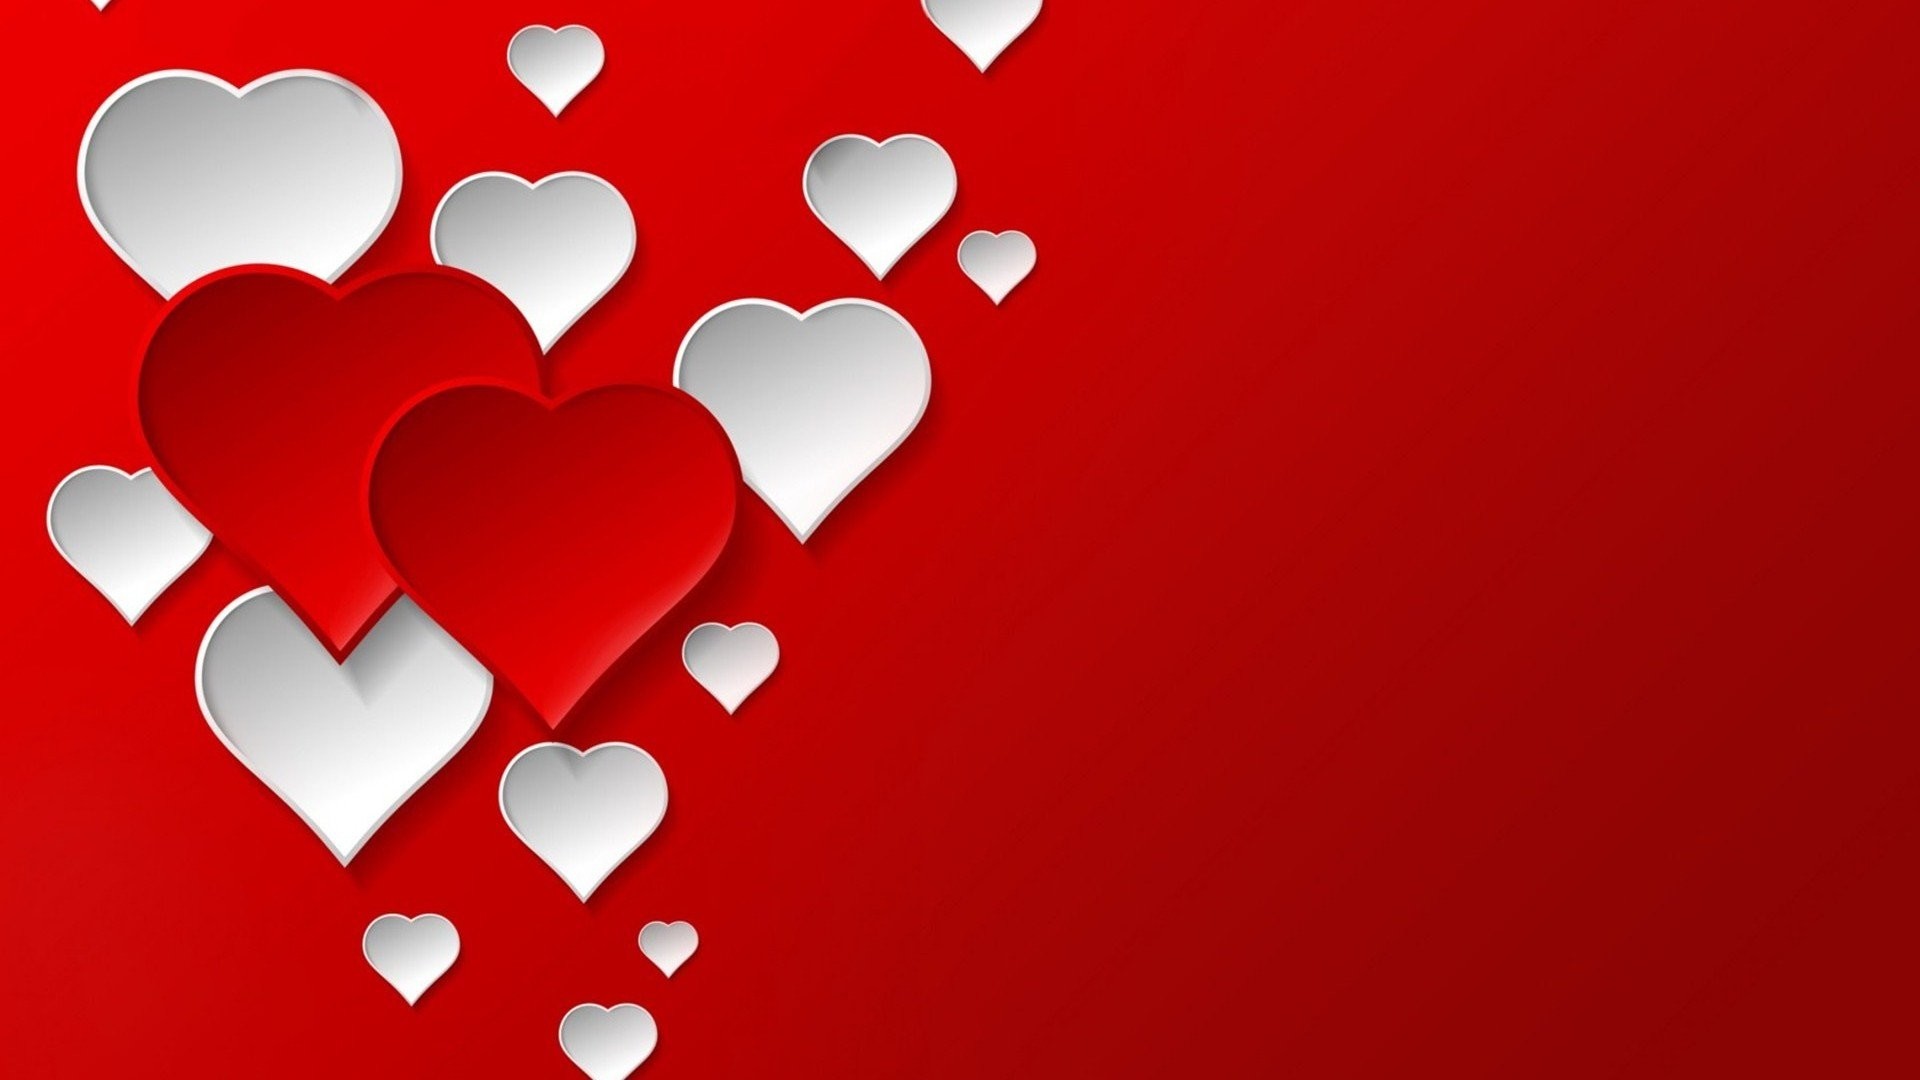 Broken Heart Hd Wallpaper Background, 20, Heart Break Pictures Background  Image And Wallpaper for Free Download